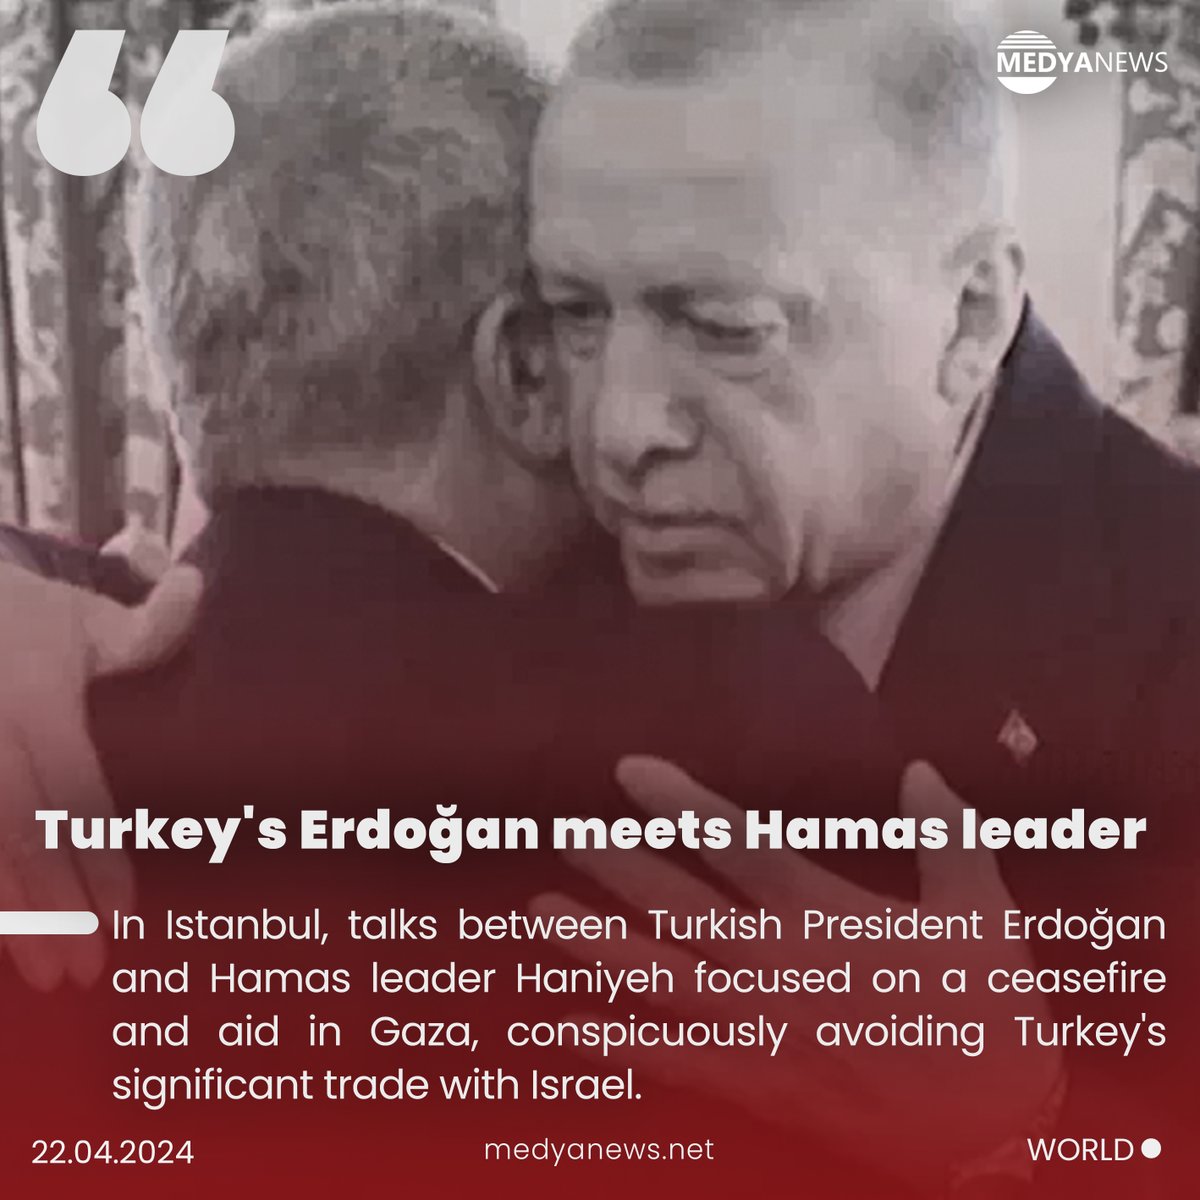 #Hamas and Turkish President Erdoğan discuss #Gazaceasefire and aid, despite stalled Israel truce talks. (buff.ly/3QcfVvd)